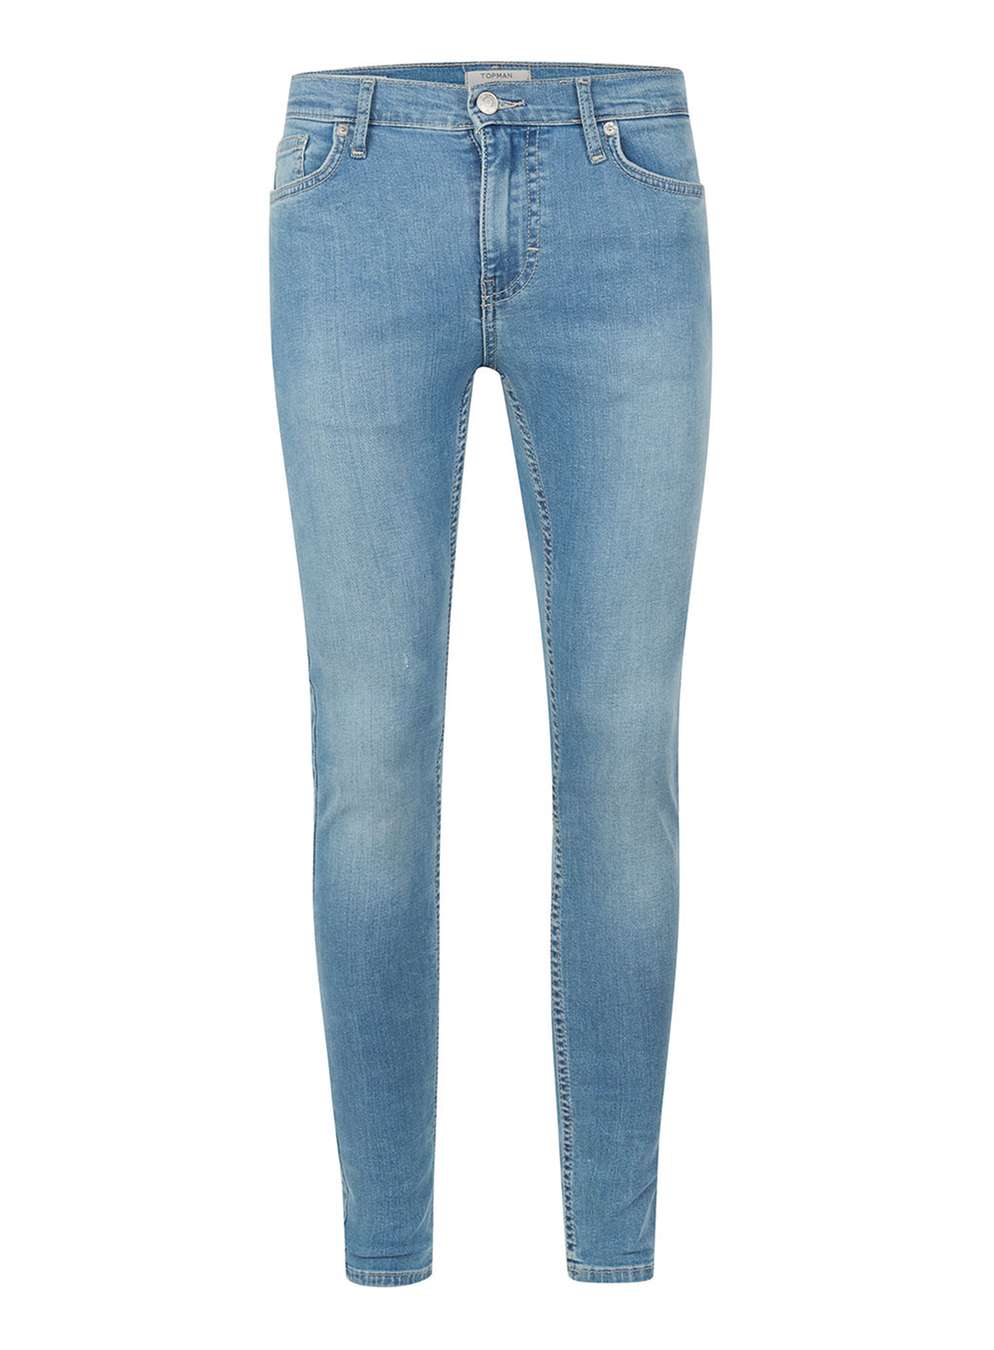 What to Do with Old Blue Skinny Jeans – careyfashion.com